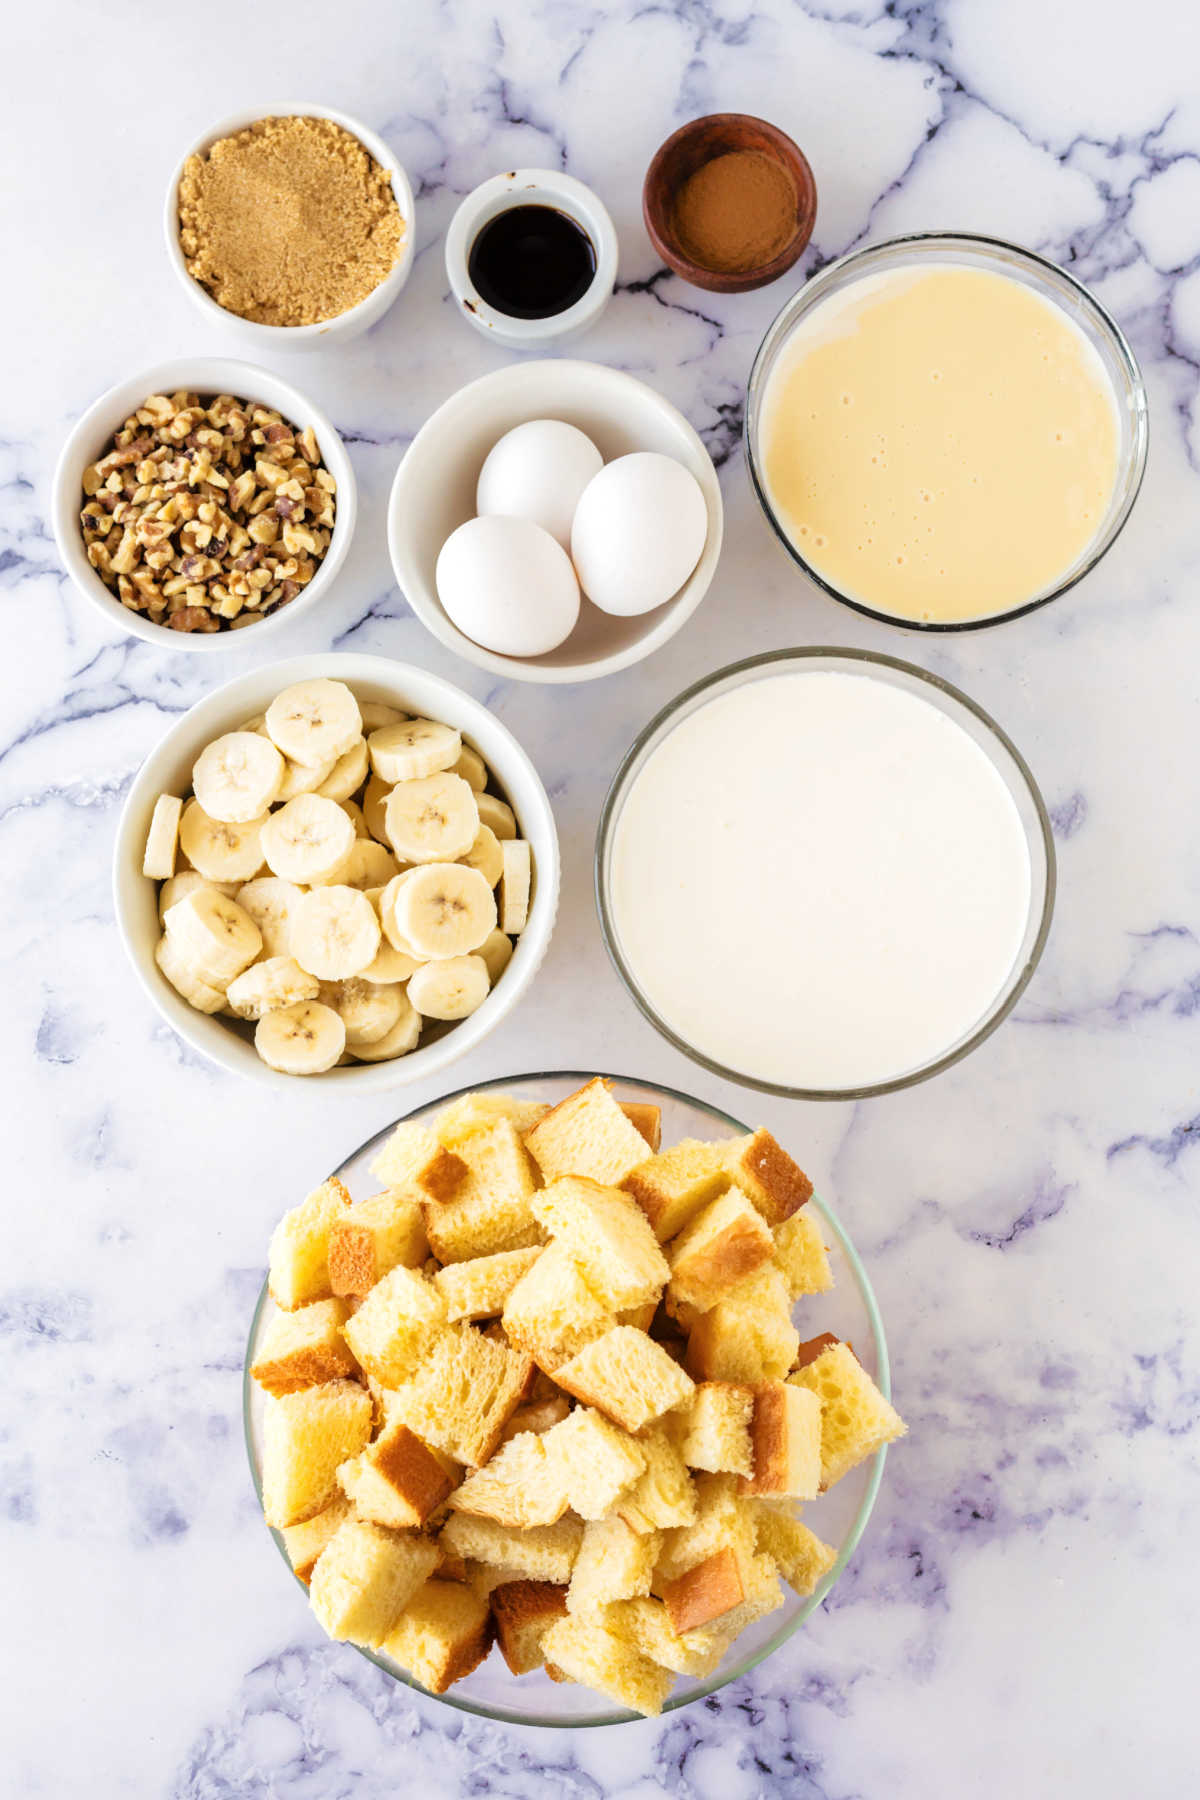 Ingredients including cubed bread, milk, eggs, sweetened condensed milk, bananas, walnuts, brown sugar, vanilla, and cinnamon ready to be made into banana bread pudding.